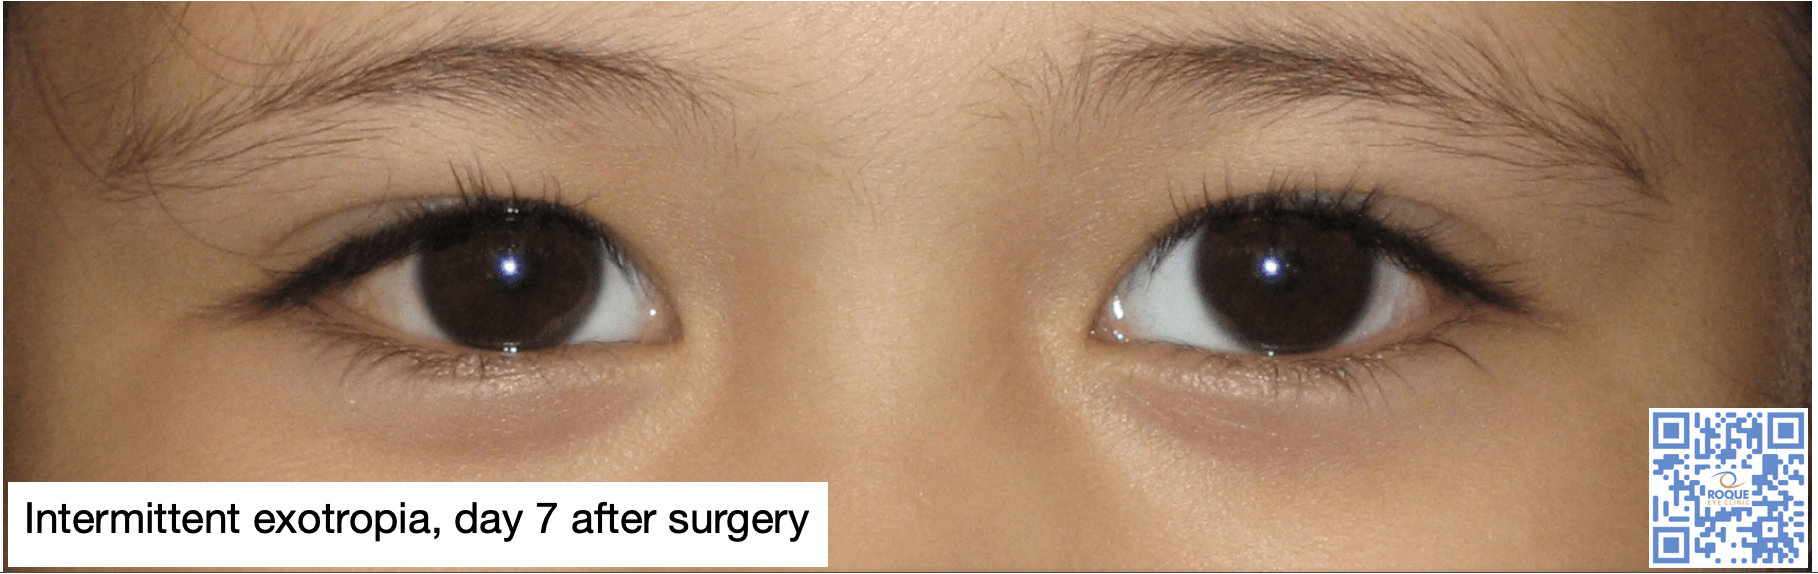 Intermittent exotropia, day 7 after surgery